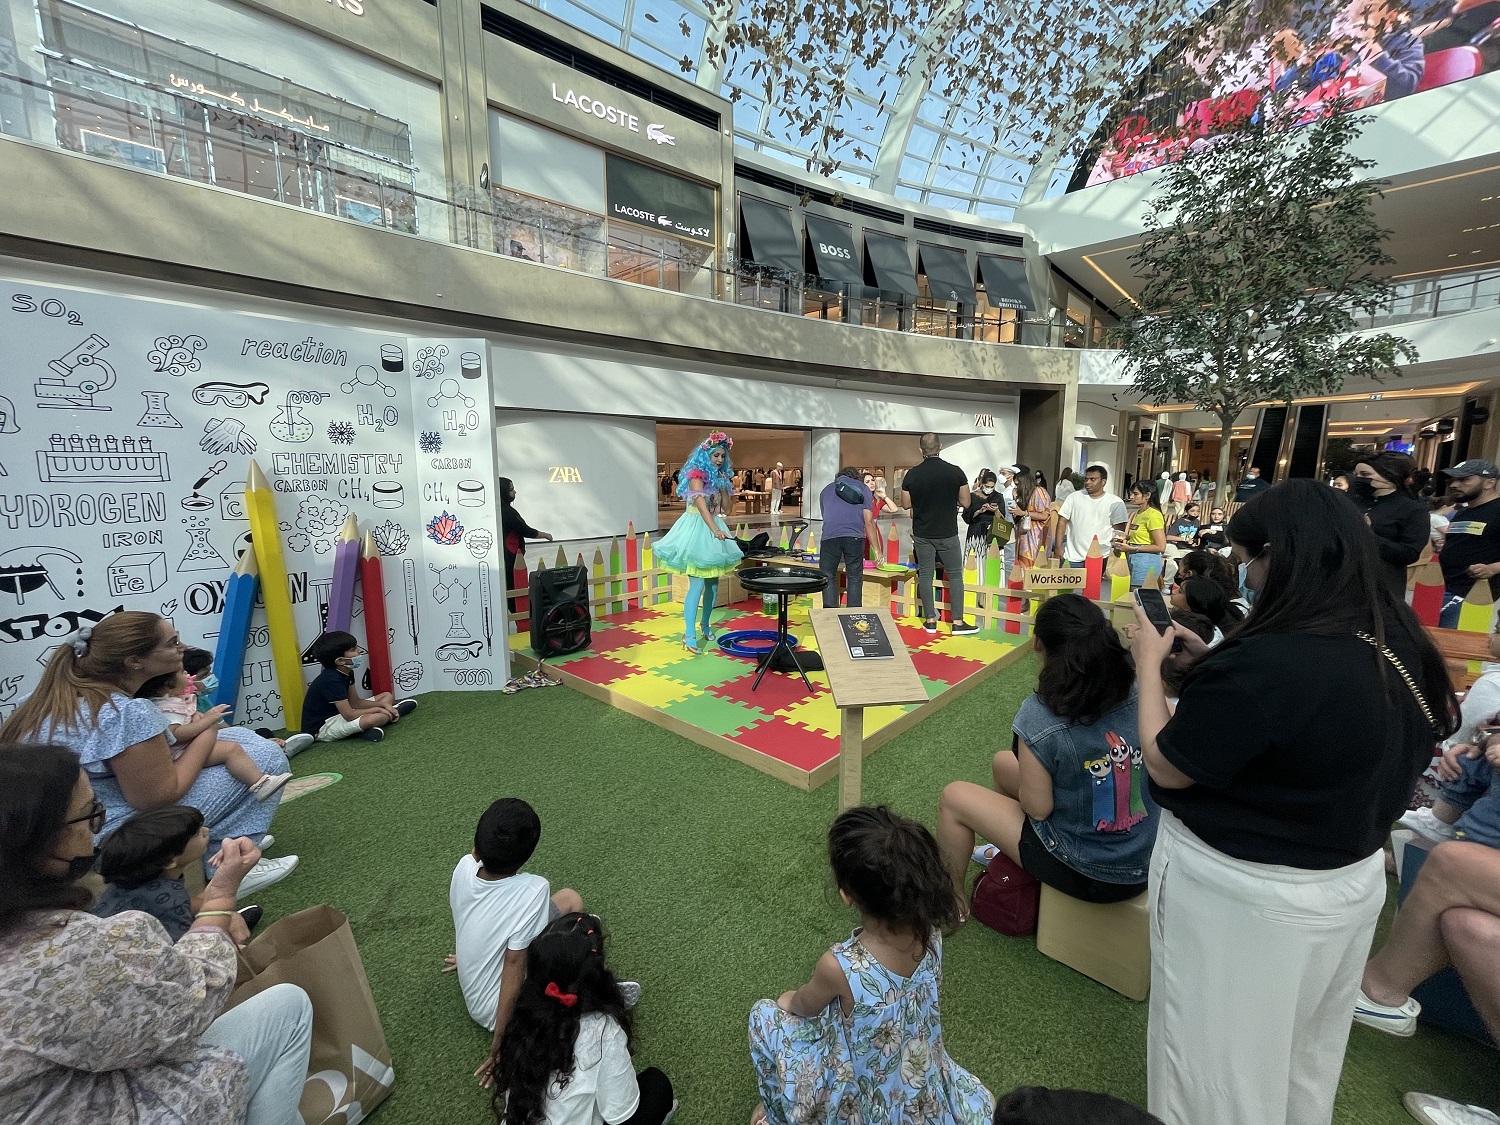 5 cool pop-ups to check out in Dubai - What's On Dubai